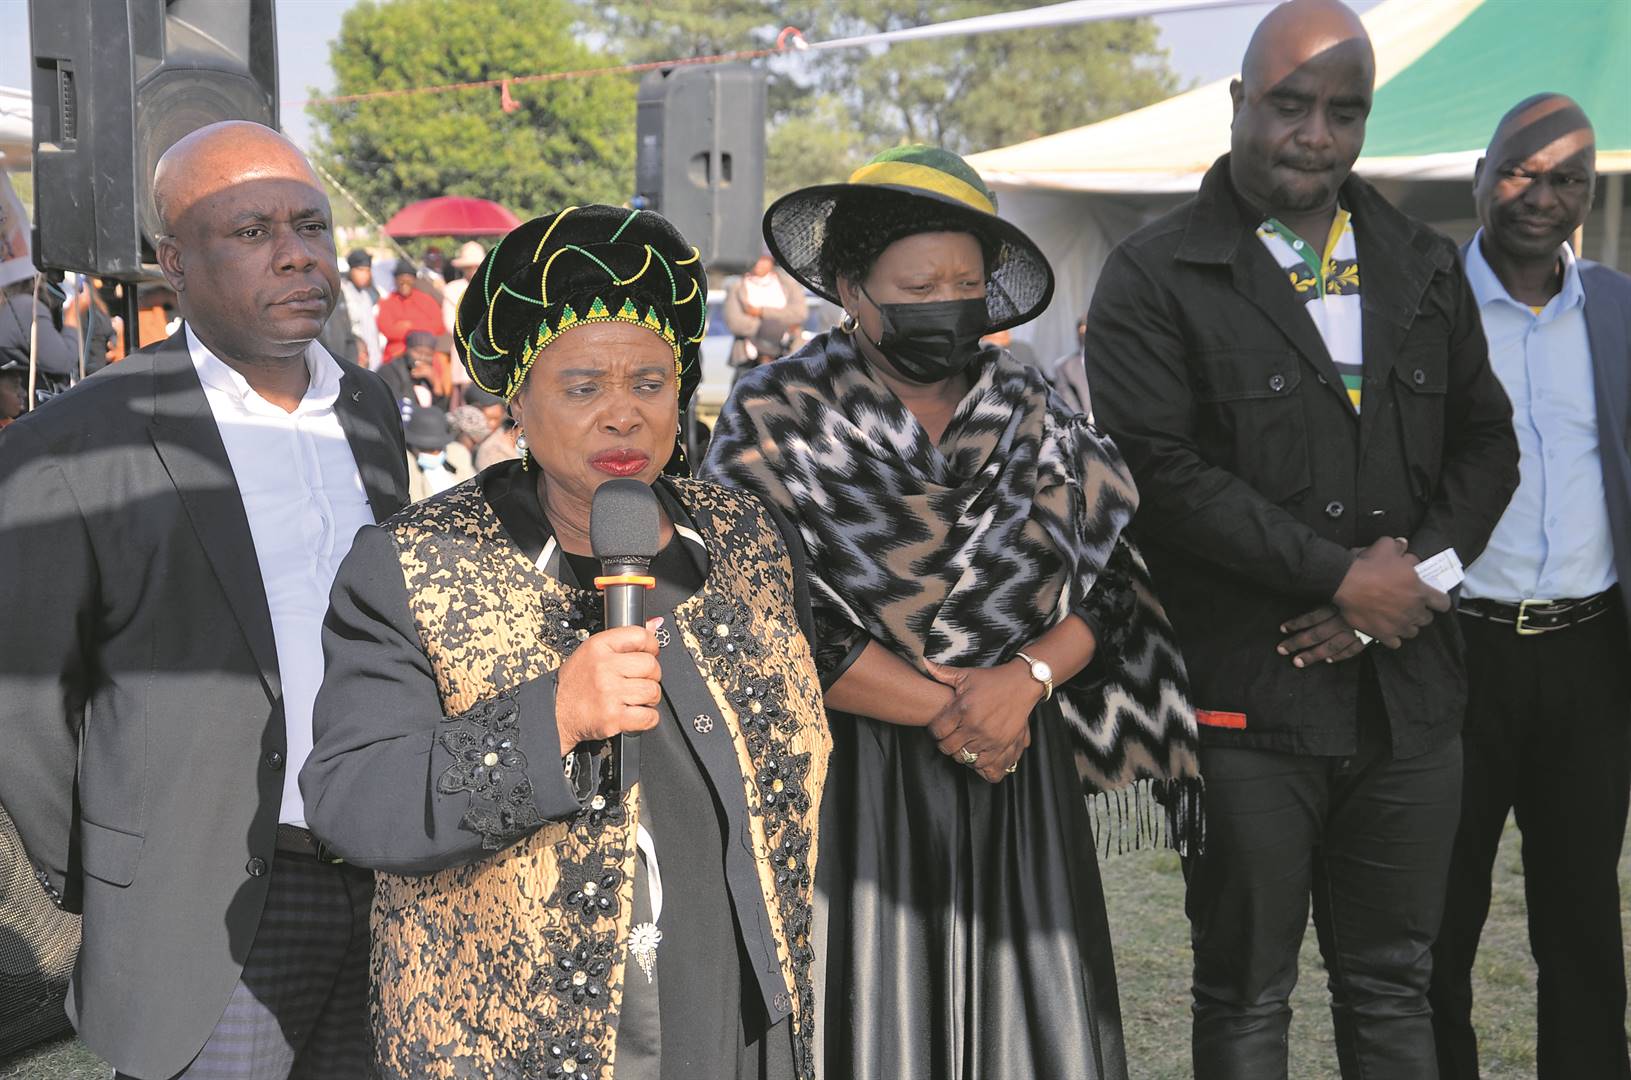 ANC NEC member Violet Siwela, speaking at the funeral service of the slain traffic cop Thabo Mashego on Sunday, called for rapists to be castrated.